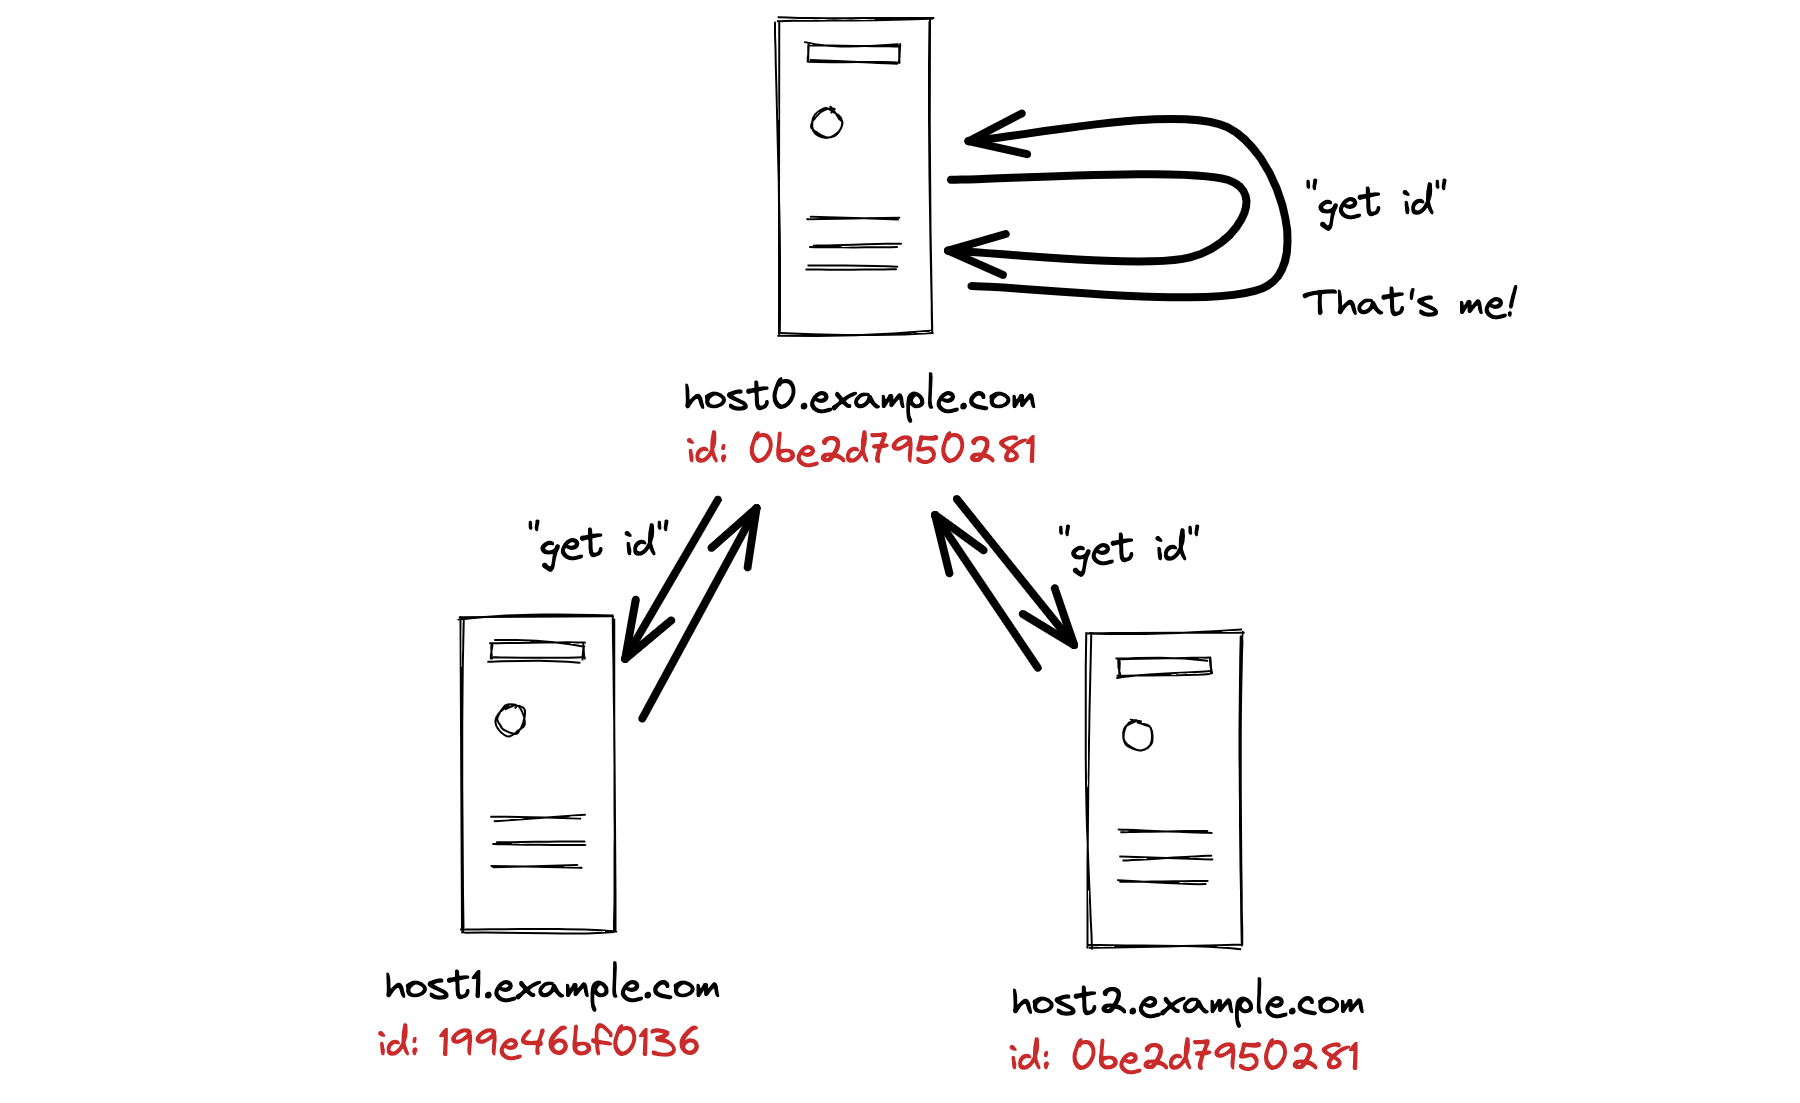 Three servers as in the previous image. Arrows indicate that host0 sends messages labeled “get id” to itself, host1, and host2.